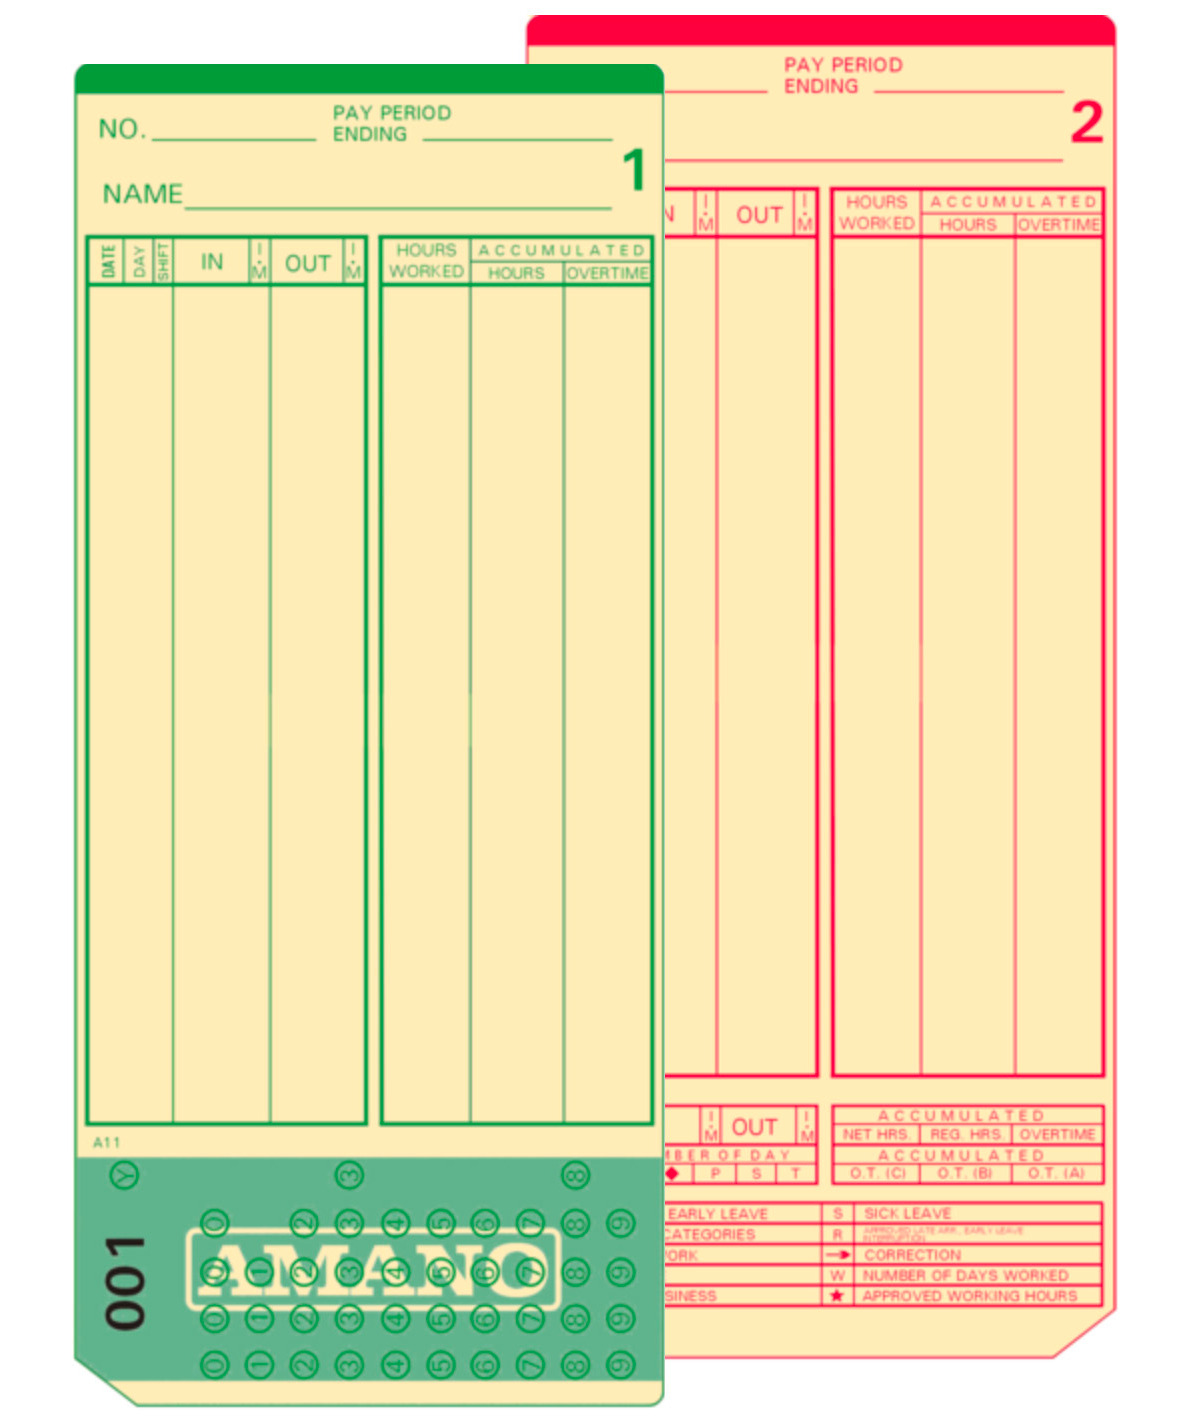 Amano AMA-249000 Time Cards for MJR-8000N